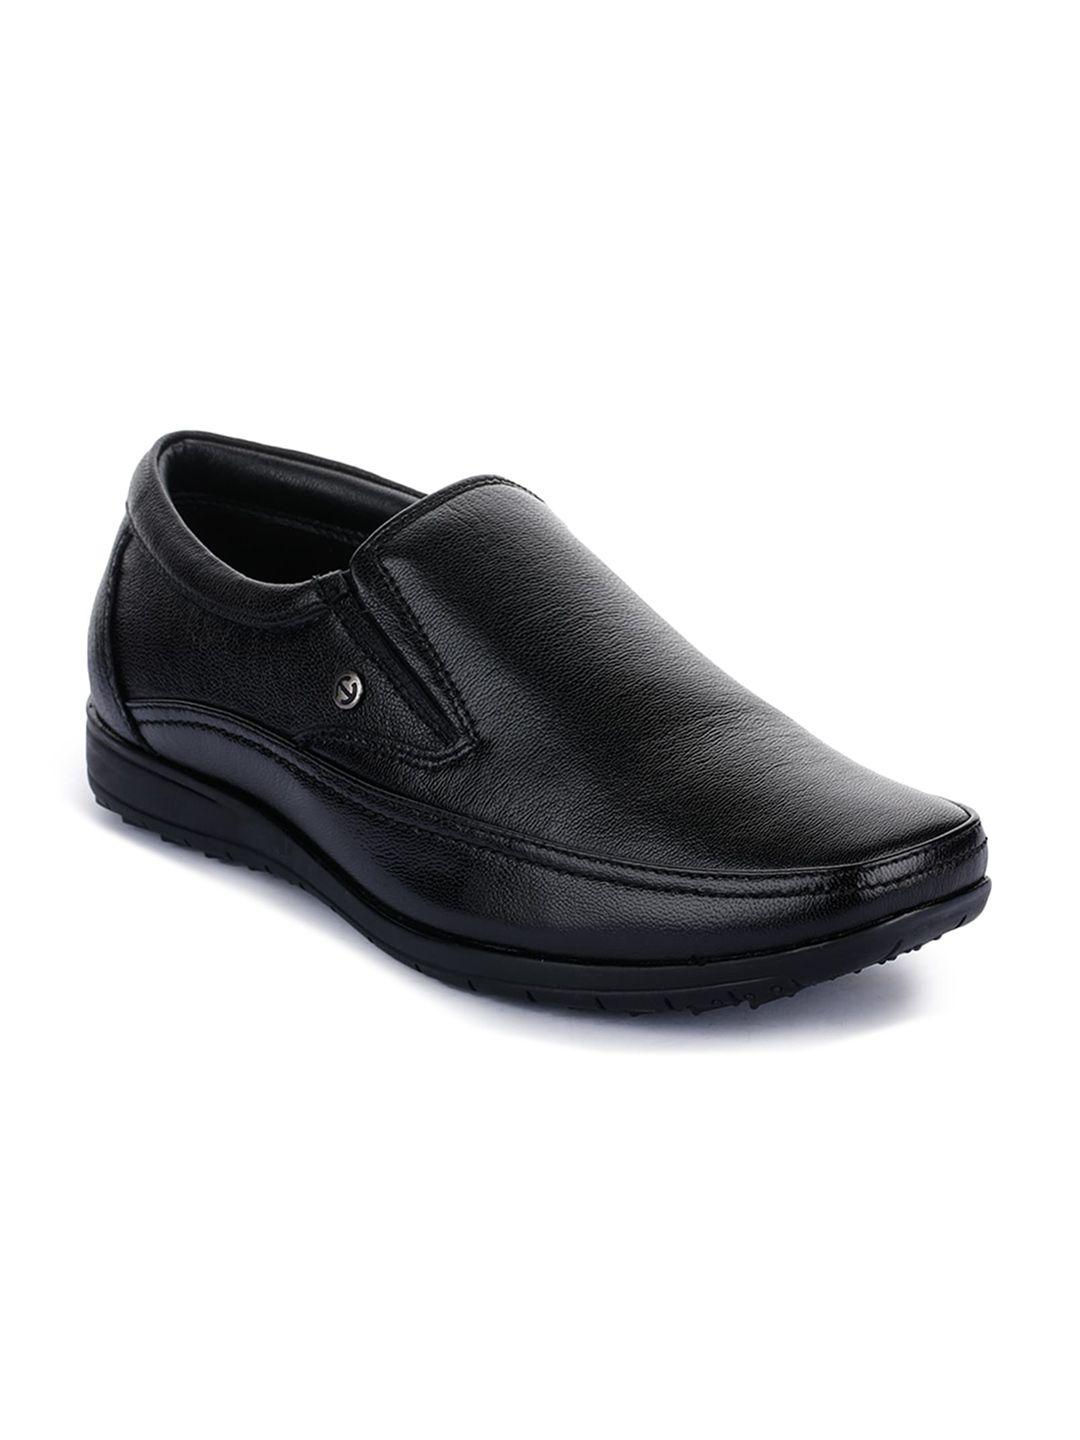 liberty men textured leather formal slip-on shoes